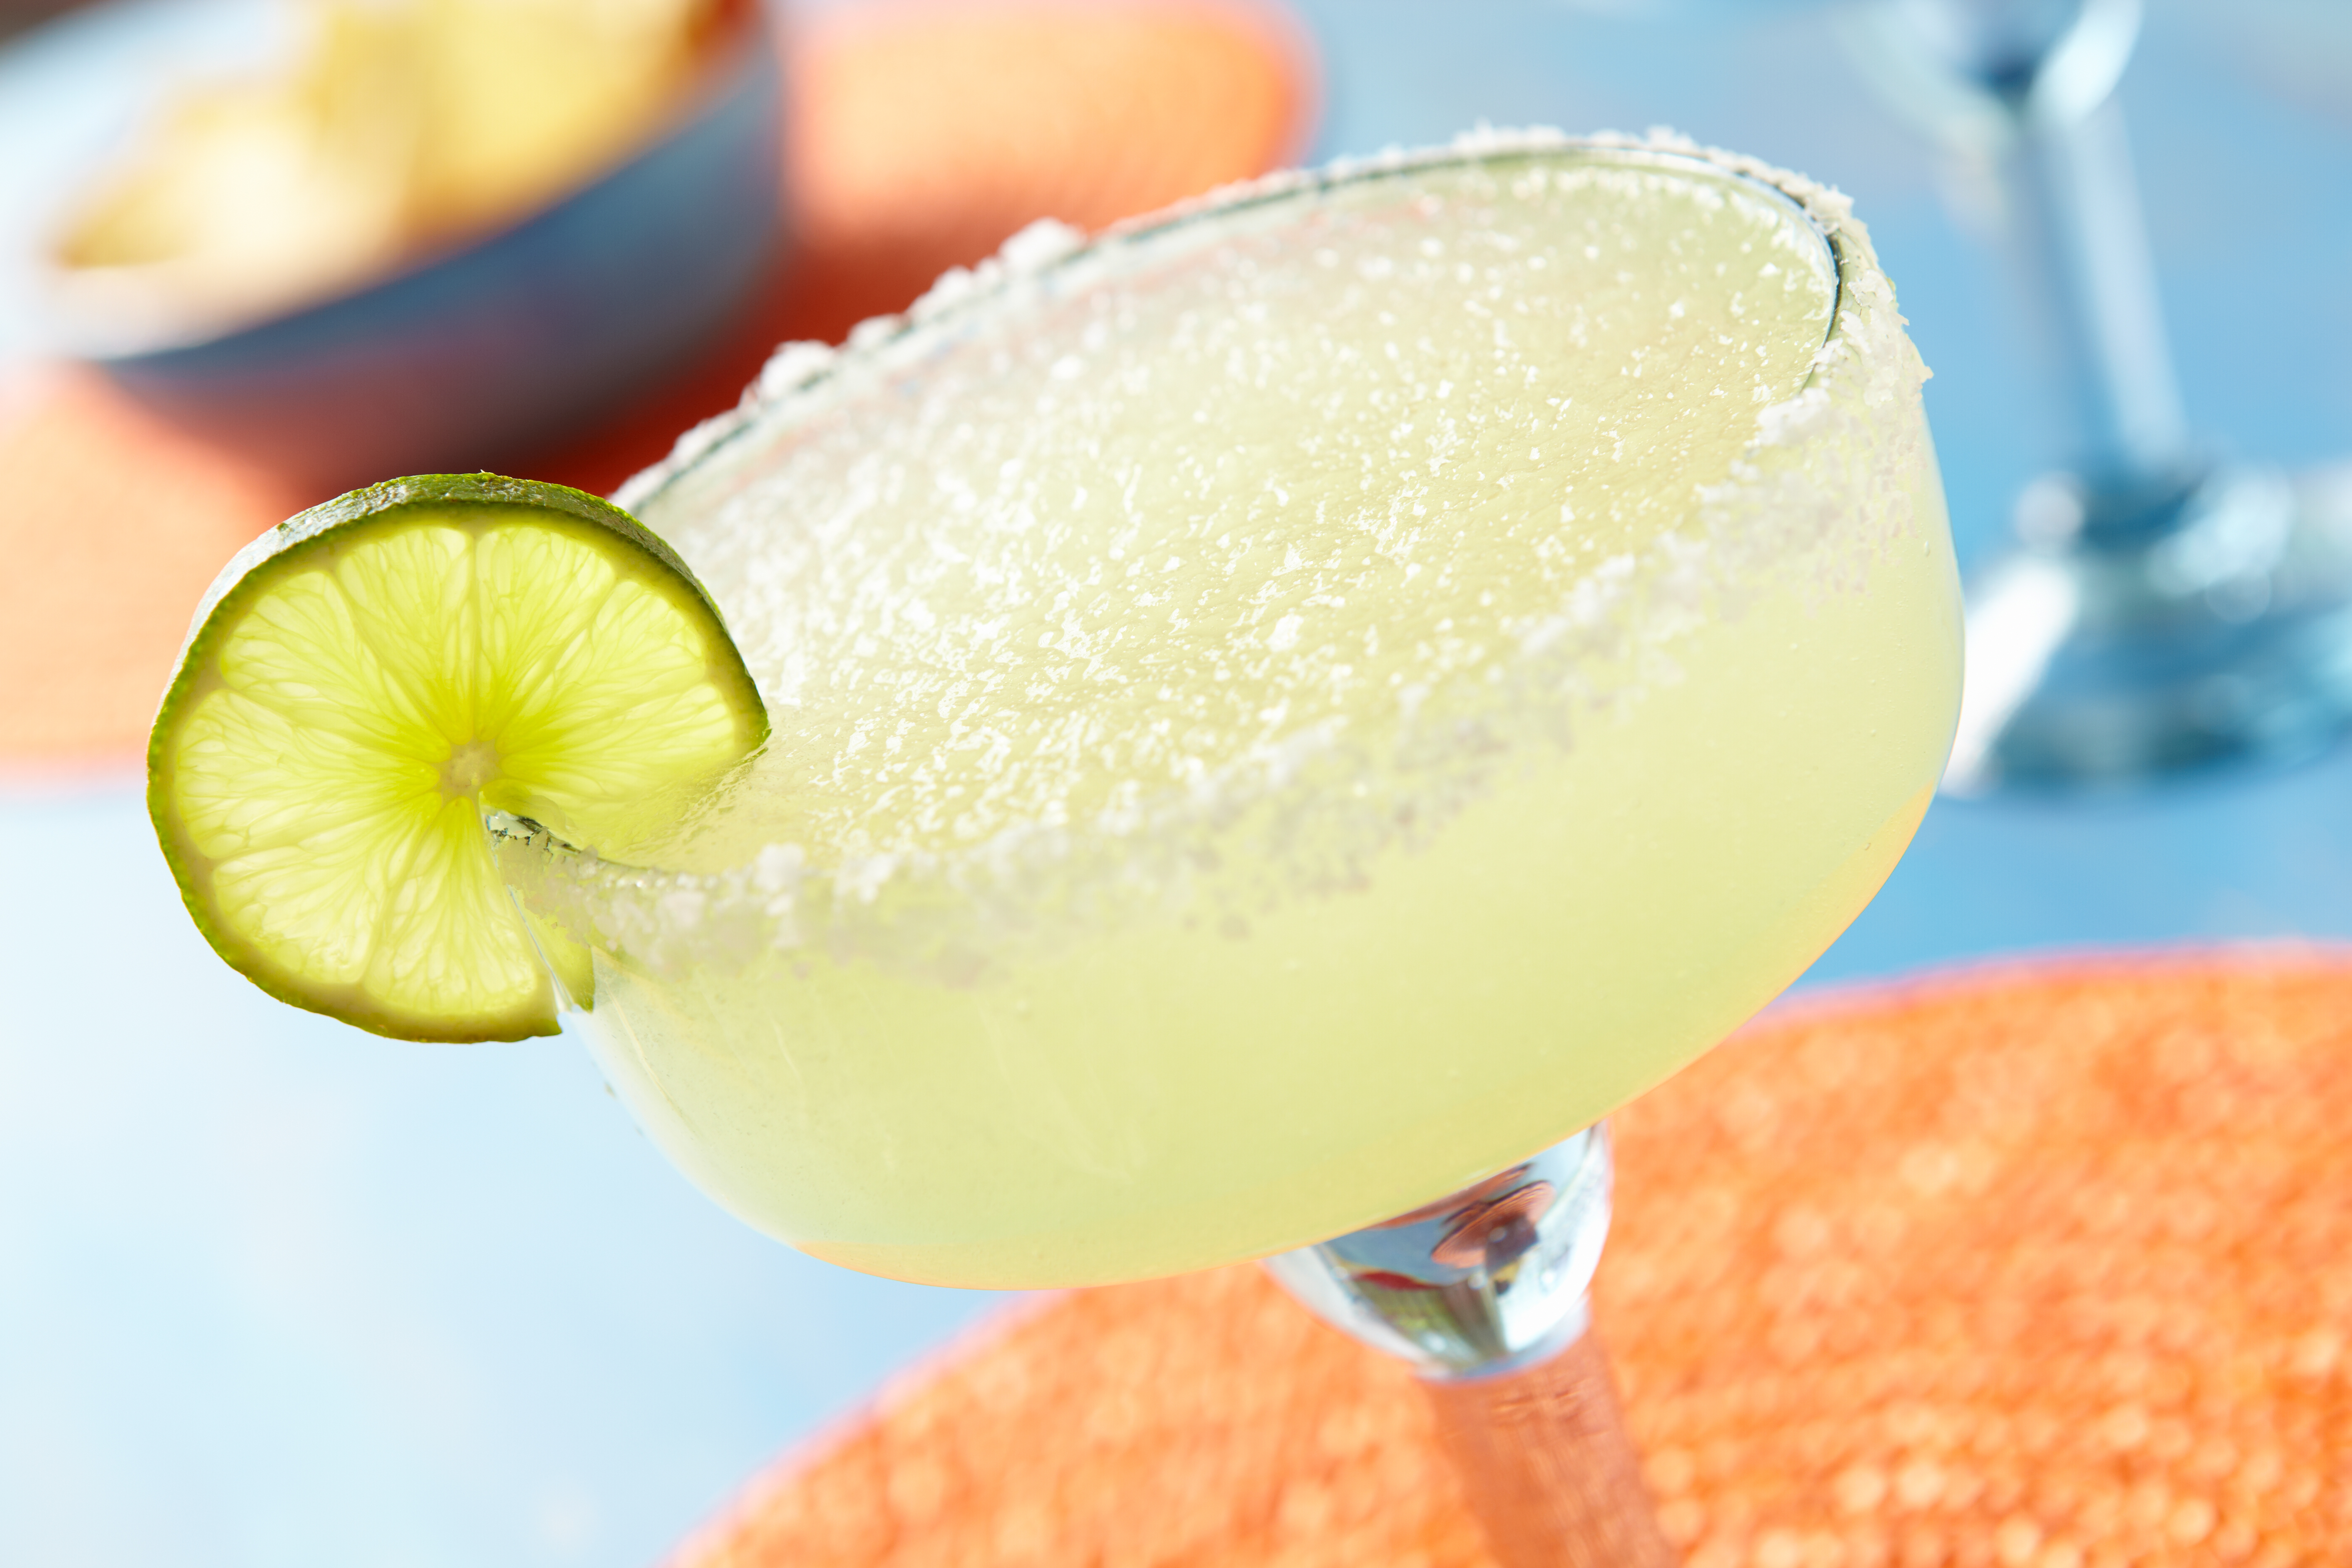 It's Your Last Chance to Get a $1 Margarita at Applebee's